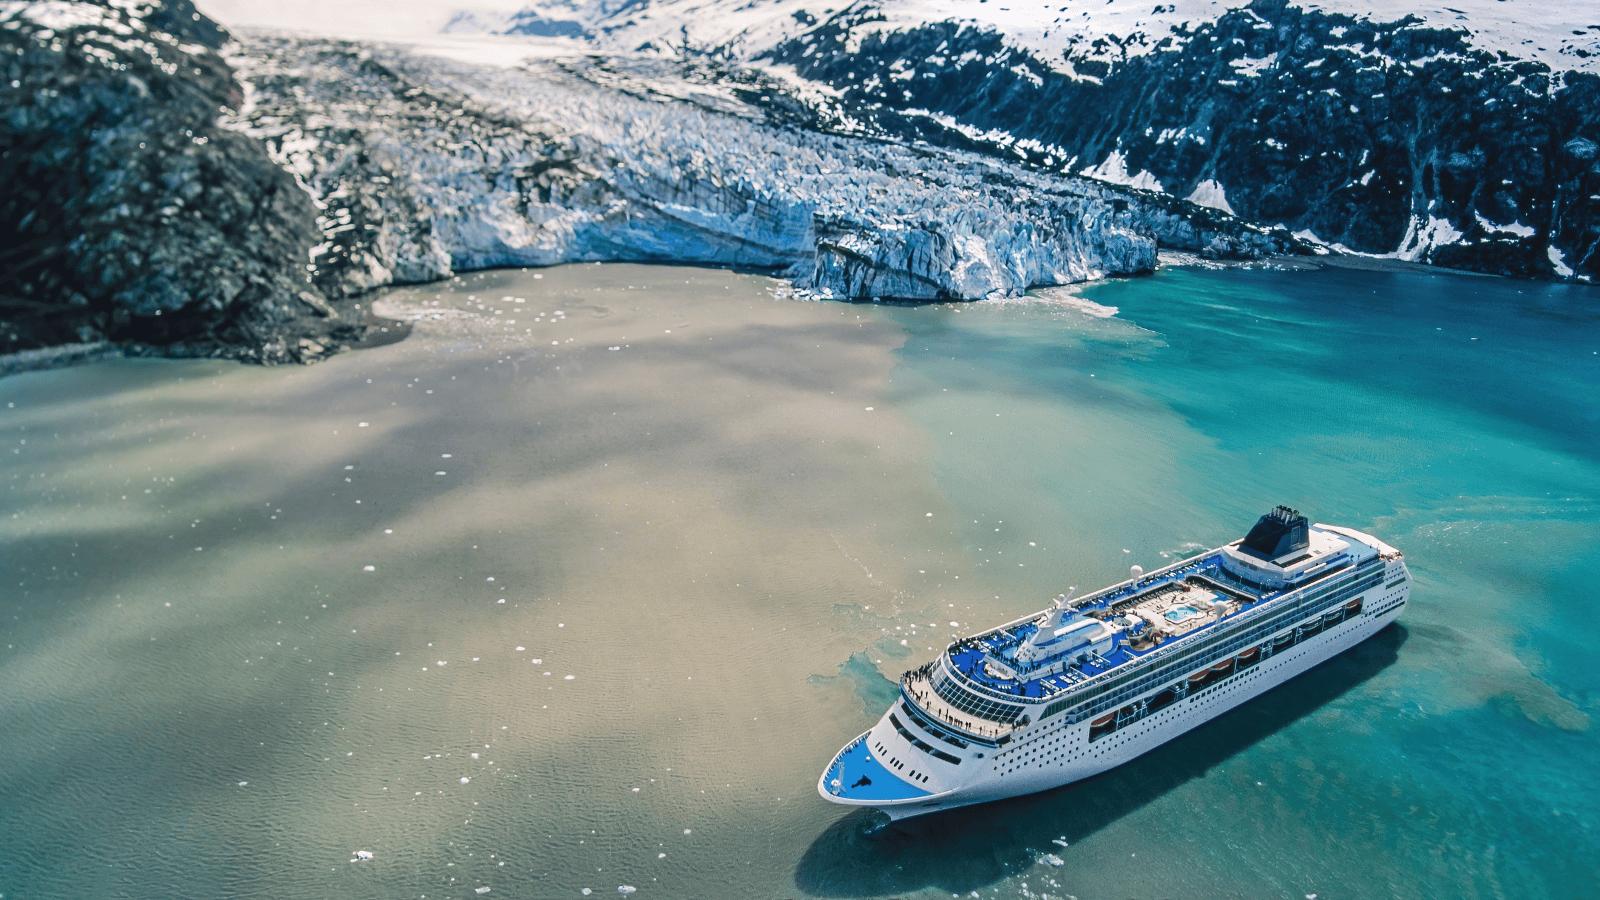 <p>Booking a cruise through Alaska is a once-in-a-lifetime trip everyone should take before it’s too late.</p> <p>Scenic cruises are an excellent way to sightsee Alaska’s dramatic wilderness and rugged terrain. You’ll experience firsthand why Alaska is considered the final frontier during a cruise of its famous waterways and coastal areas.</p> <p><strong>Add these Alaskan cruises to your bucket list for postcard-worthy views and thrilling exploration opportunities:</strong></p>